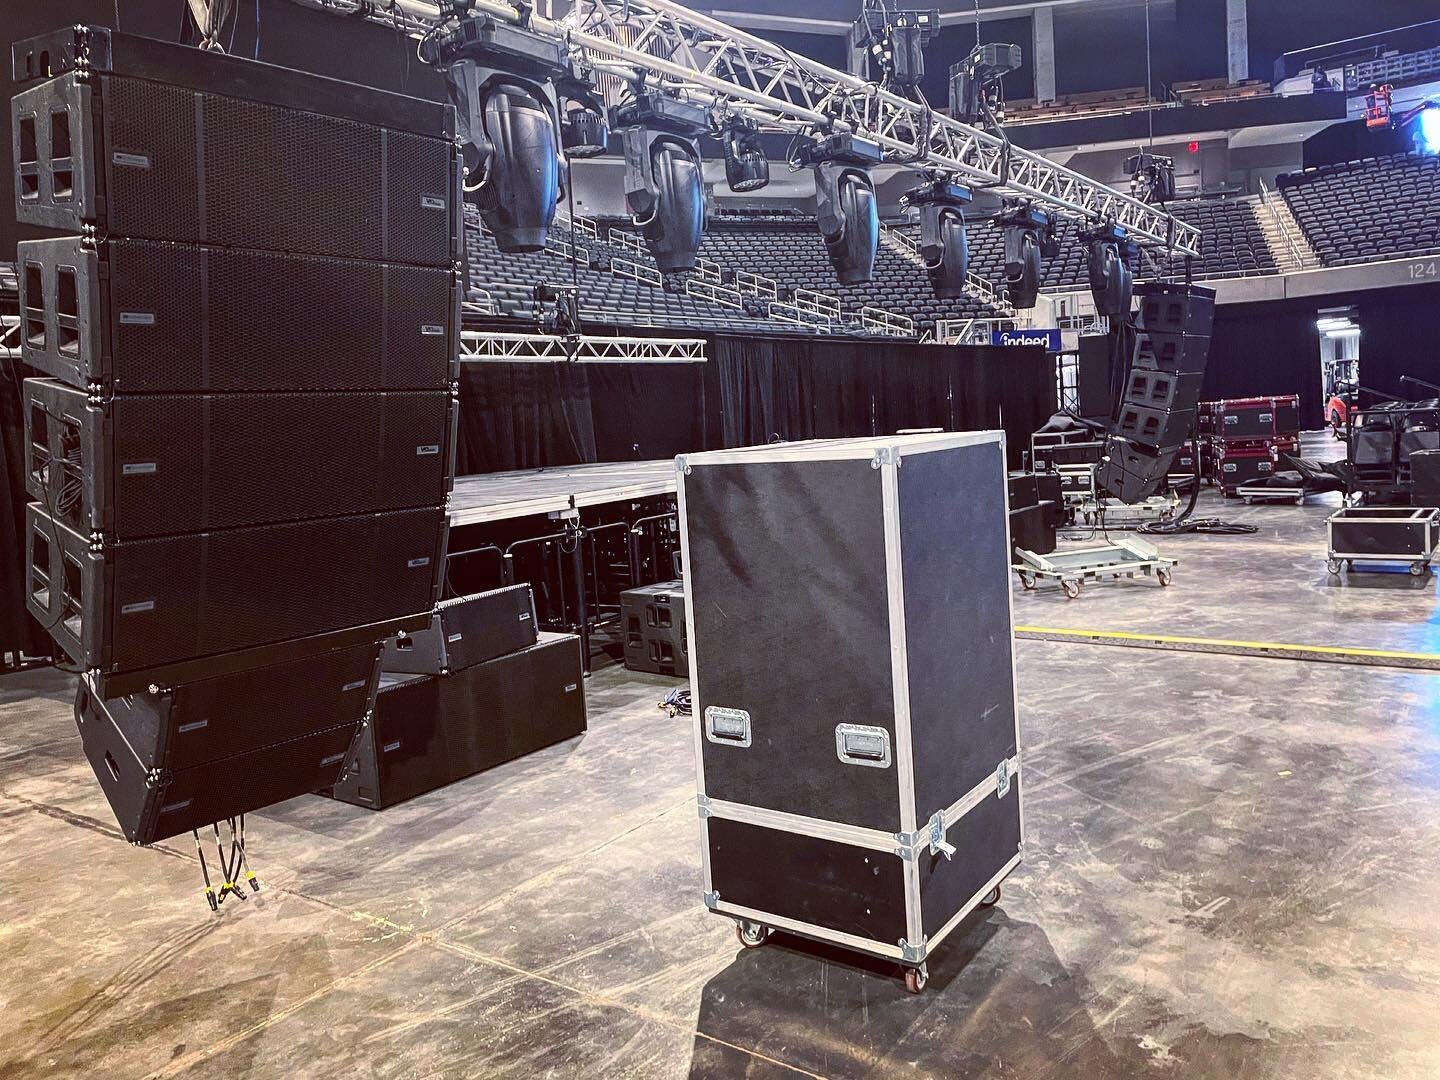 Who&rsquo;s else&rsquo;s favorite color is black?🖤 
📸 @limitlesslightsandsound 
@dbtechnologies VIO LINE ARRAY
@martinprofessional VIPERS &amp; AURAS 
.
^^ our gear puts in that work 😤
. 
#productionlife #eventproduction #lightingdesign #linearray